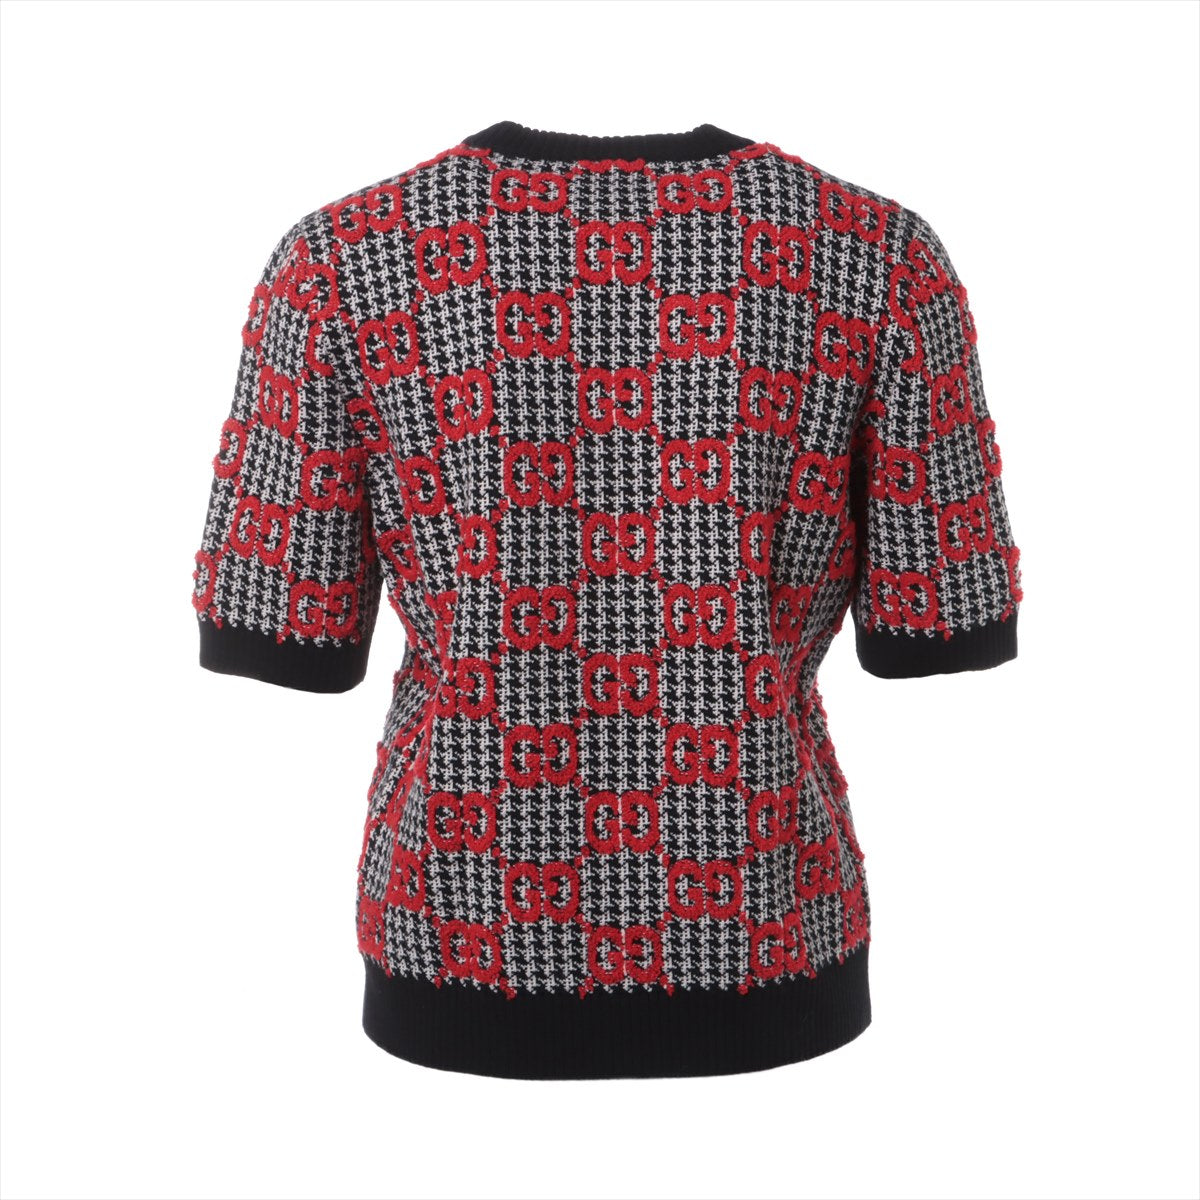 Gucci GG Wool Short Sleeve Knitwear L Ladies' Red x Black  731007  Houndstooth Woolbouclé Top